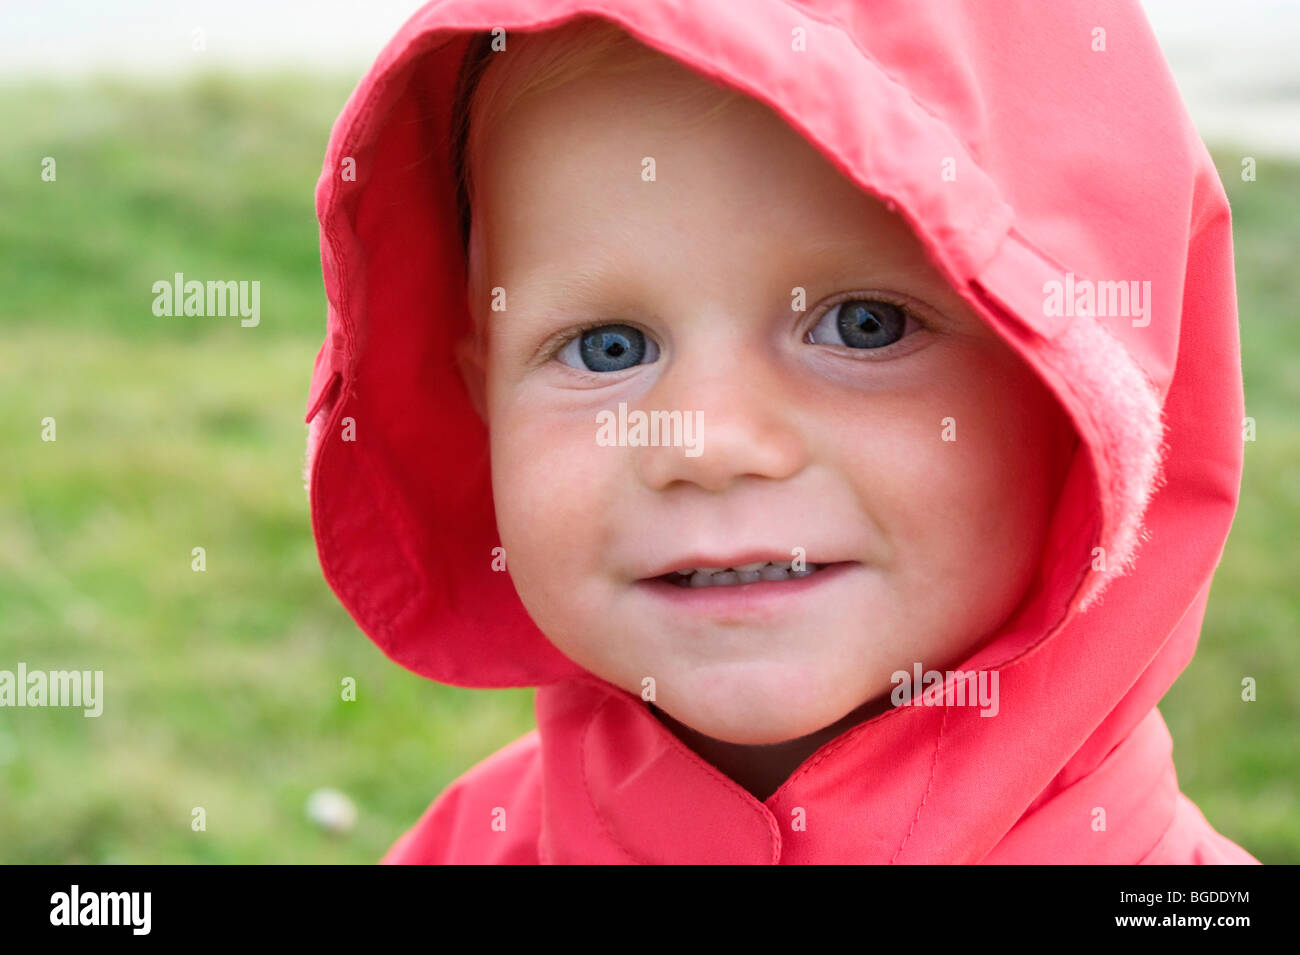 Portrait of a little girl with a red rain jacket Stock Photo